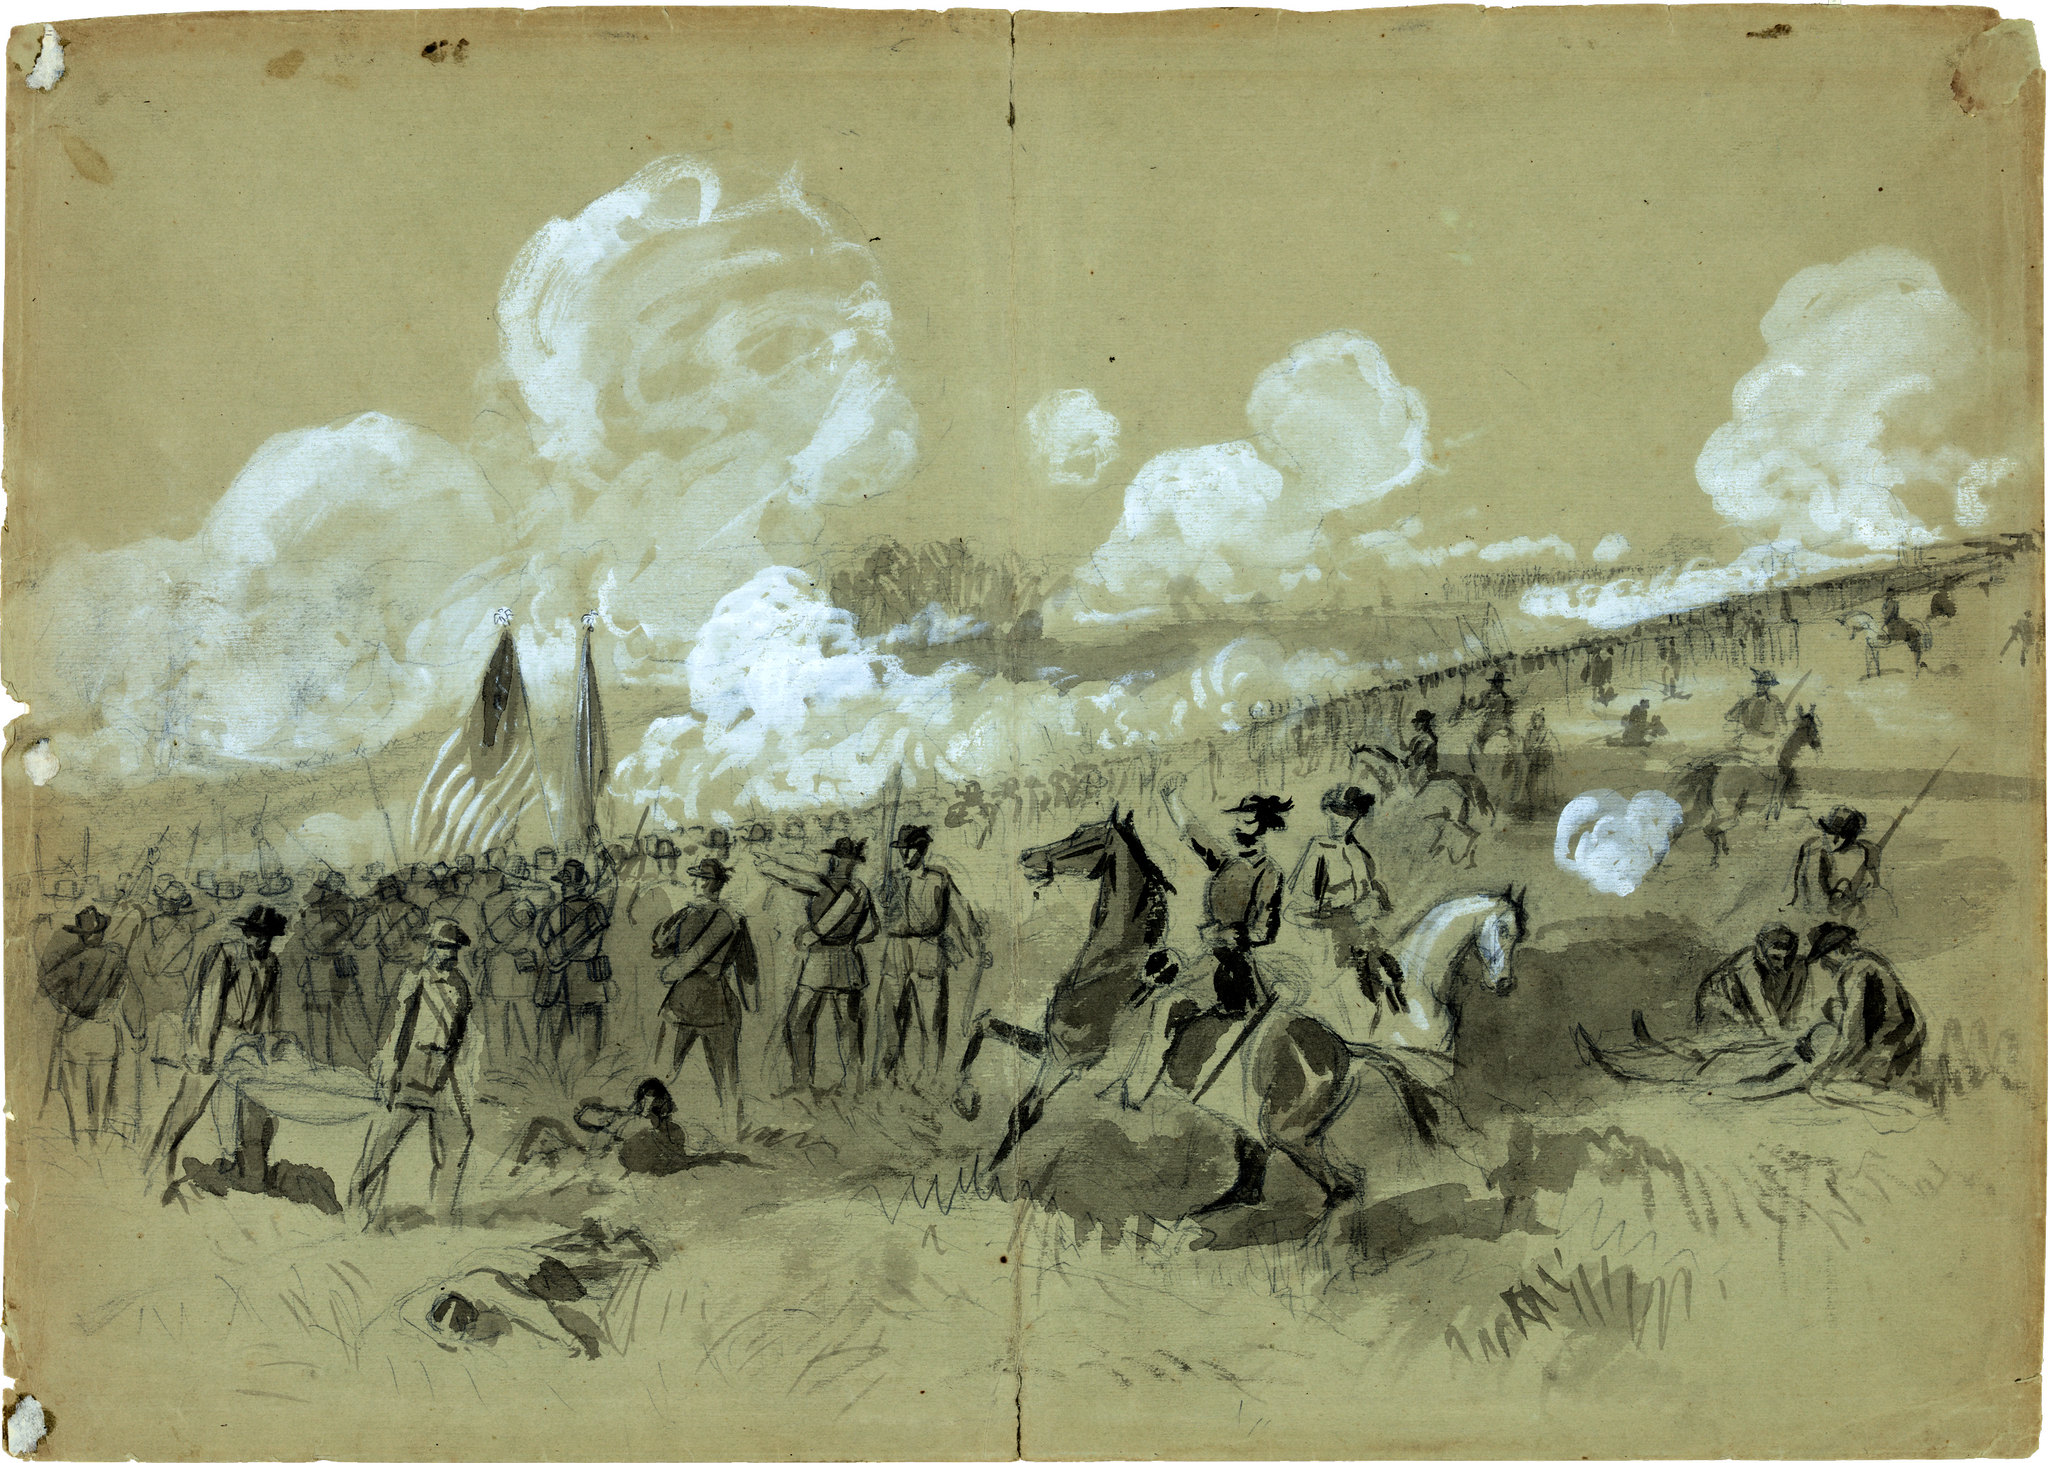 Colonel Burnside's brigade at Bull Run by Alfred R. Waud